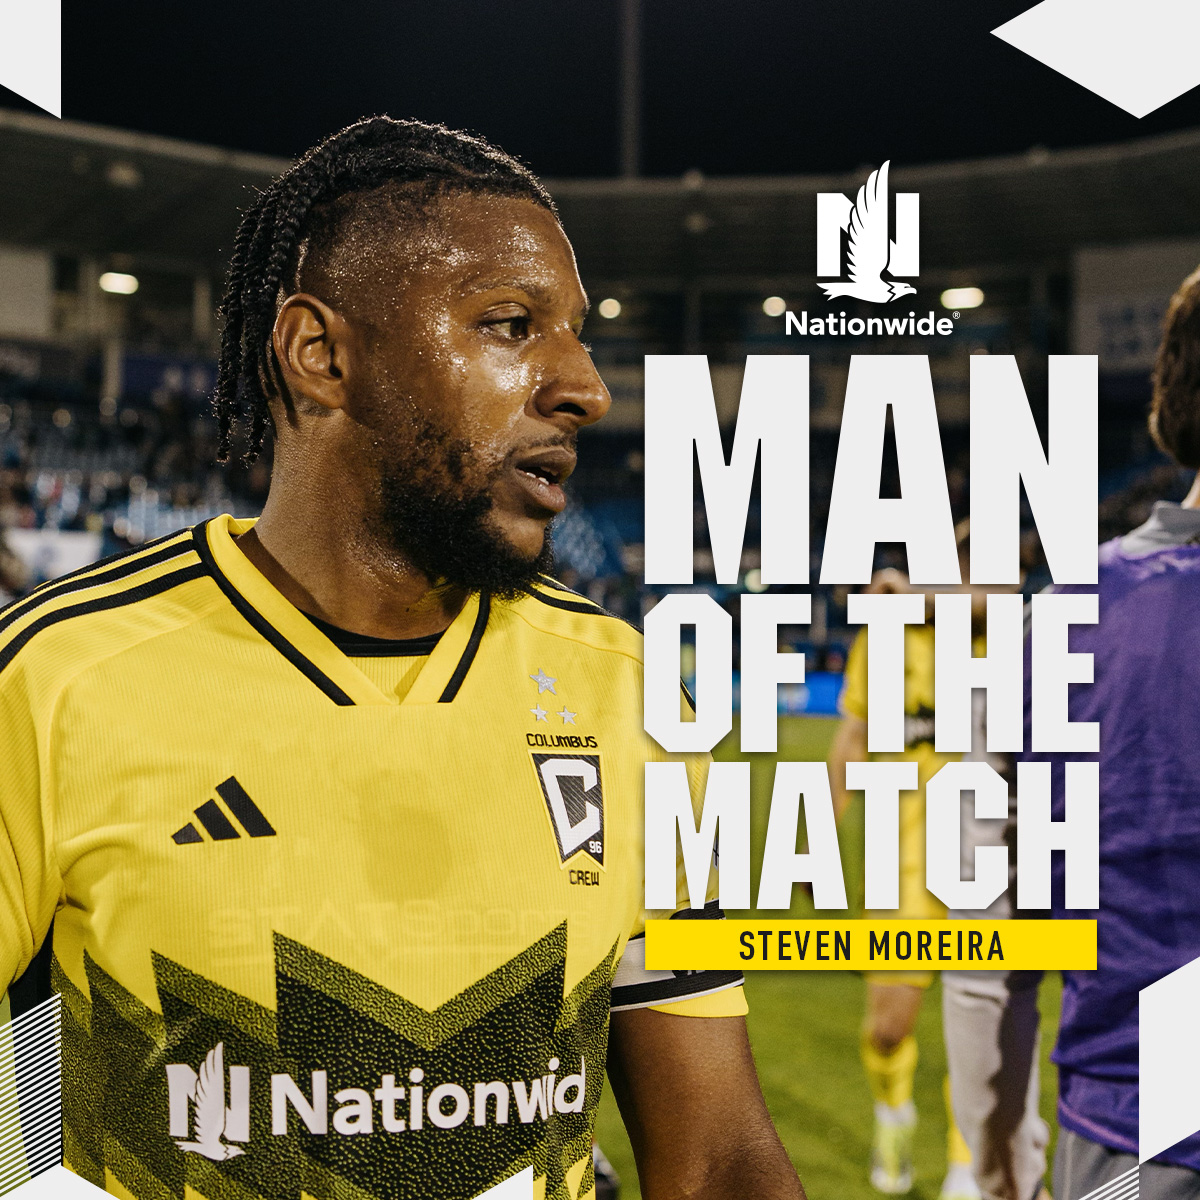 Magnificent Moreira 🎩🪄

Steven Moreira has been named tonight's Nationwide Man of the Match thanks to his stellar efforts in defense and attack. 

#Crew96 ✘ @Nationwide